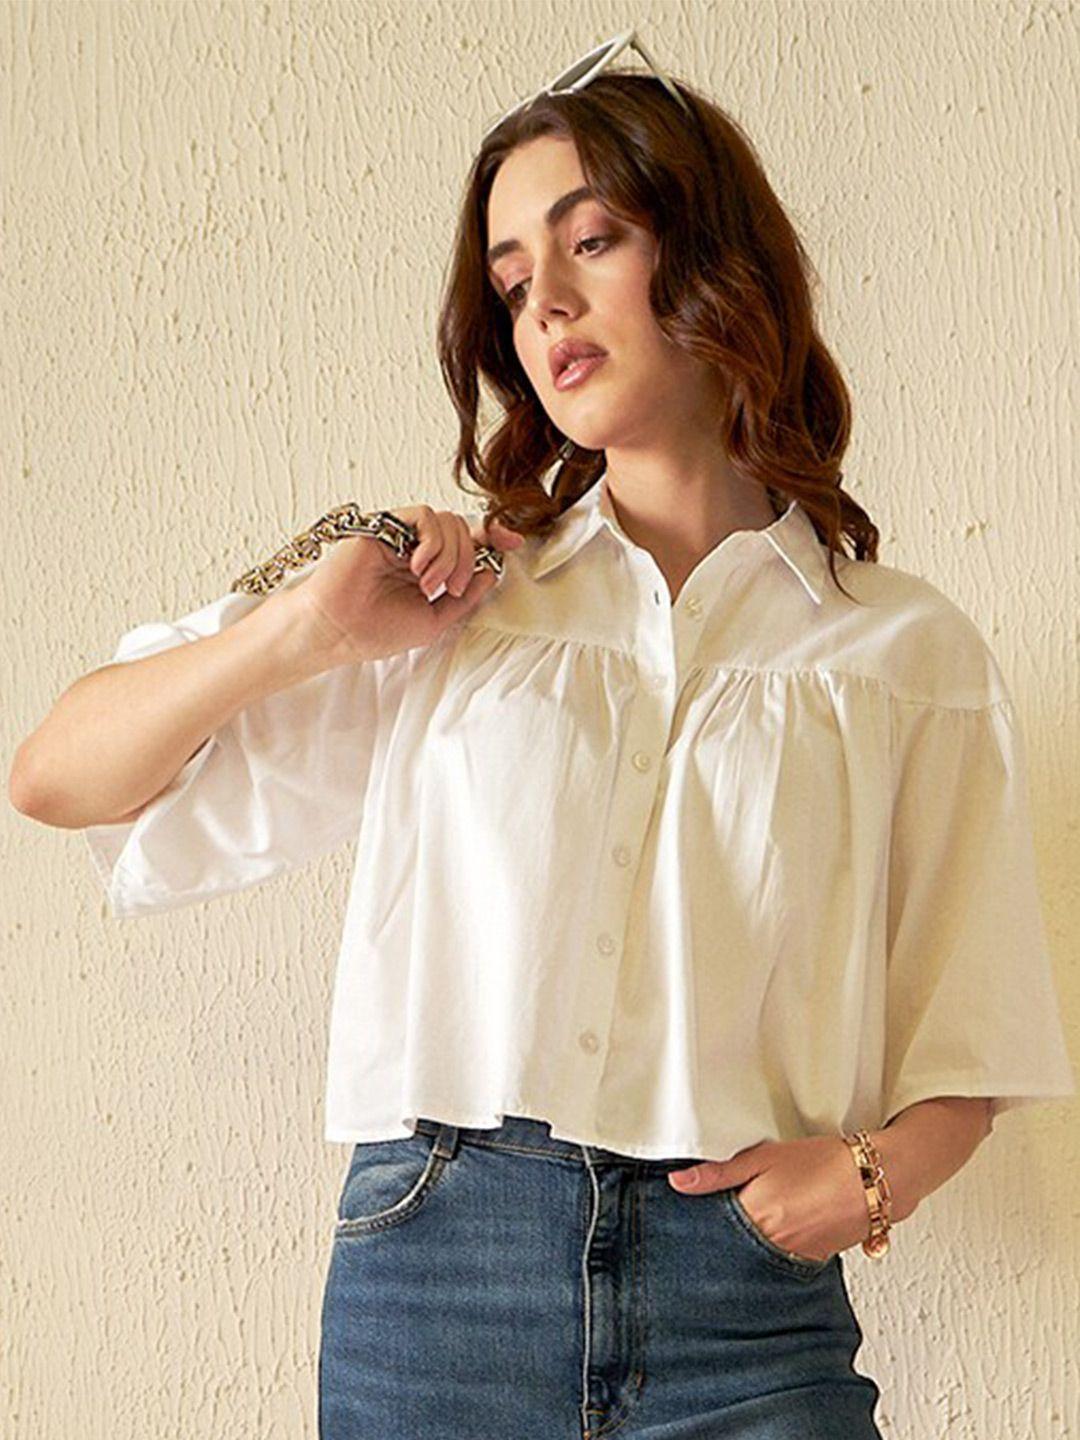 dennison puffed sleeves shirt style top